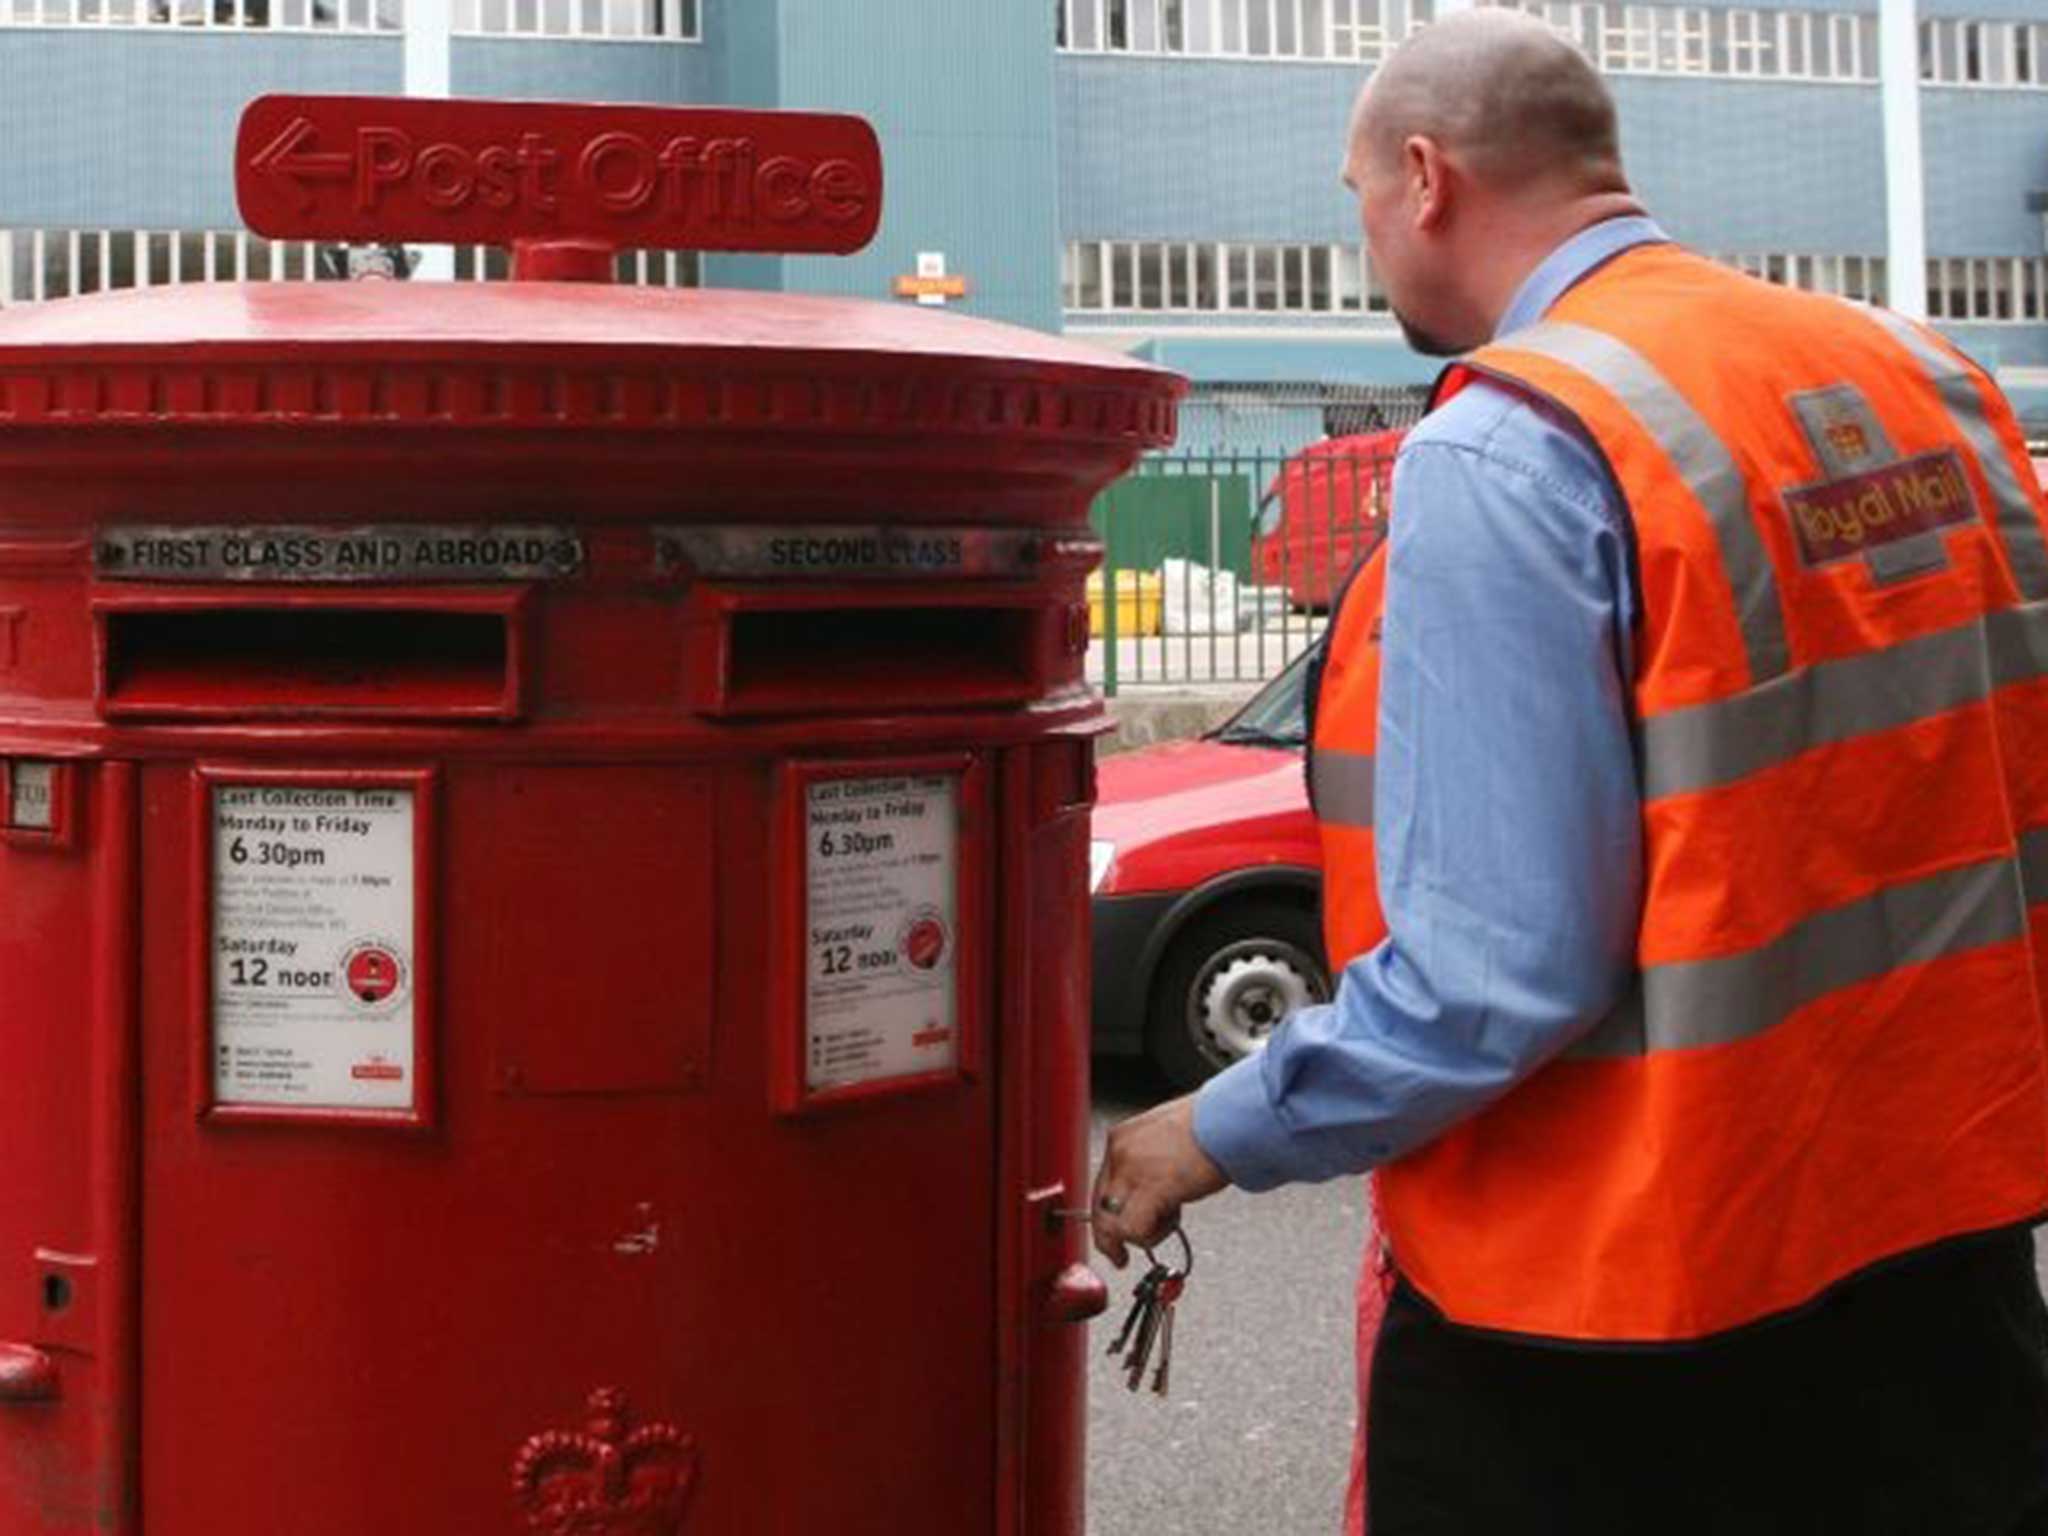 Royal Mail has shrunk its staff by 3000